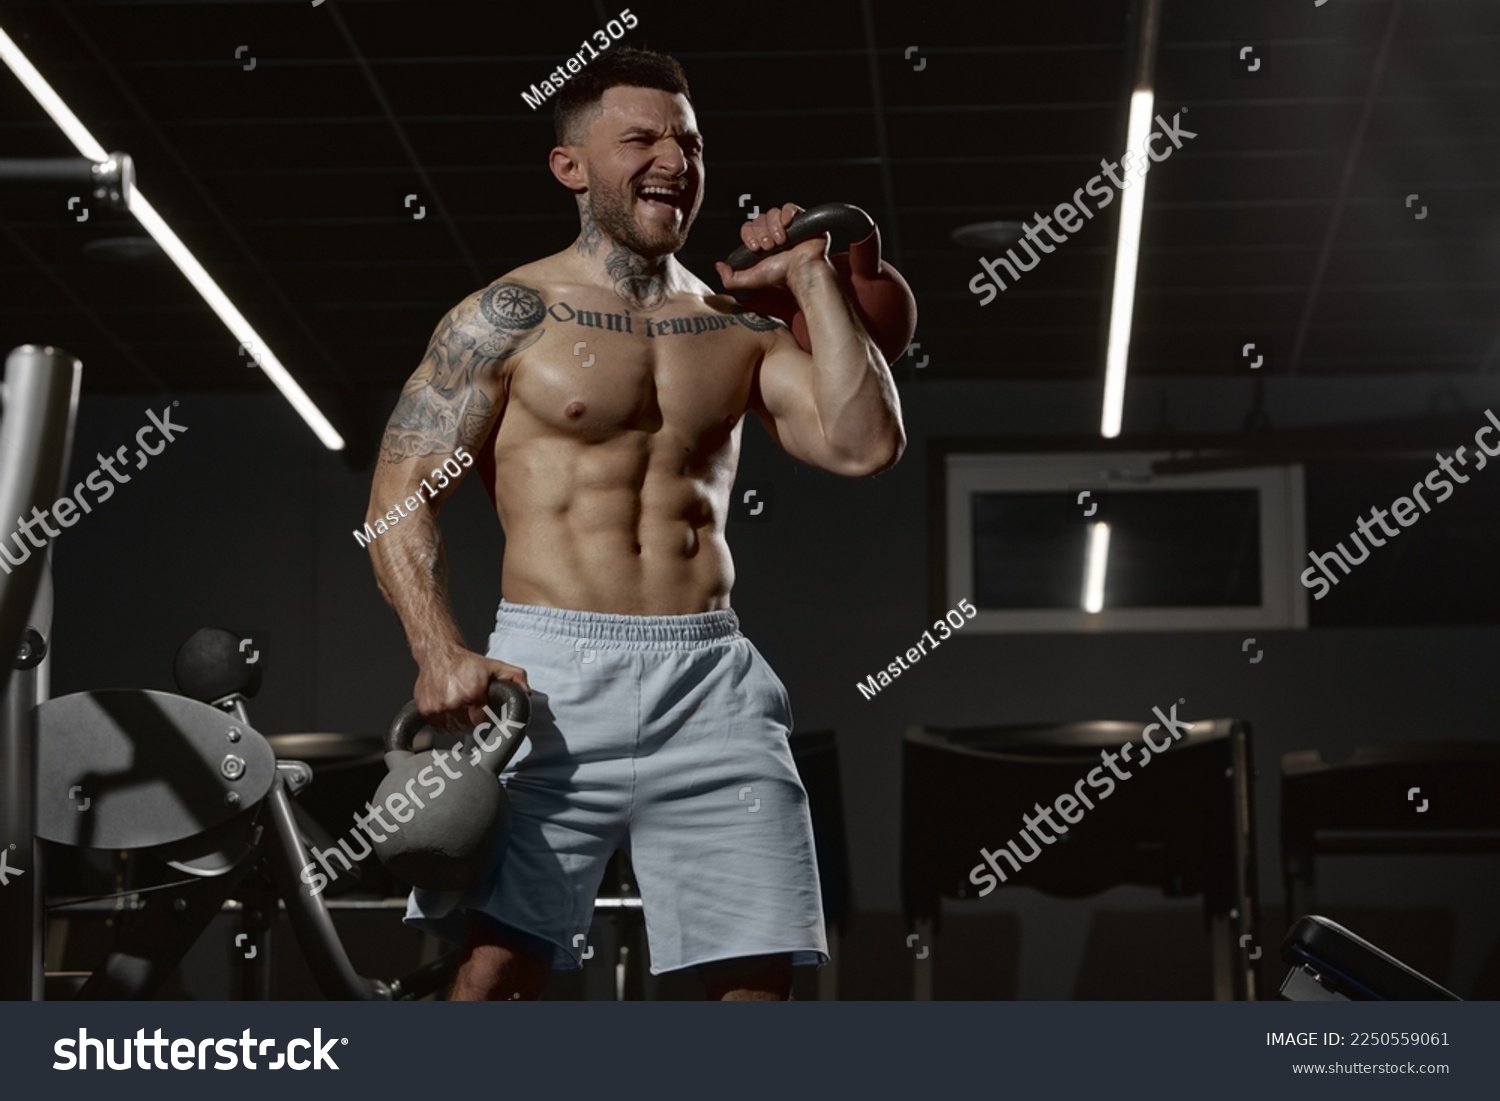 Portrait of young muscular man training shirtless in gym indoors. Hand exercises with kettlebell. Relief body shape. Concept of health, sportive lifestyle, fitness, body care, diet, strength #2250559061